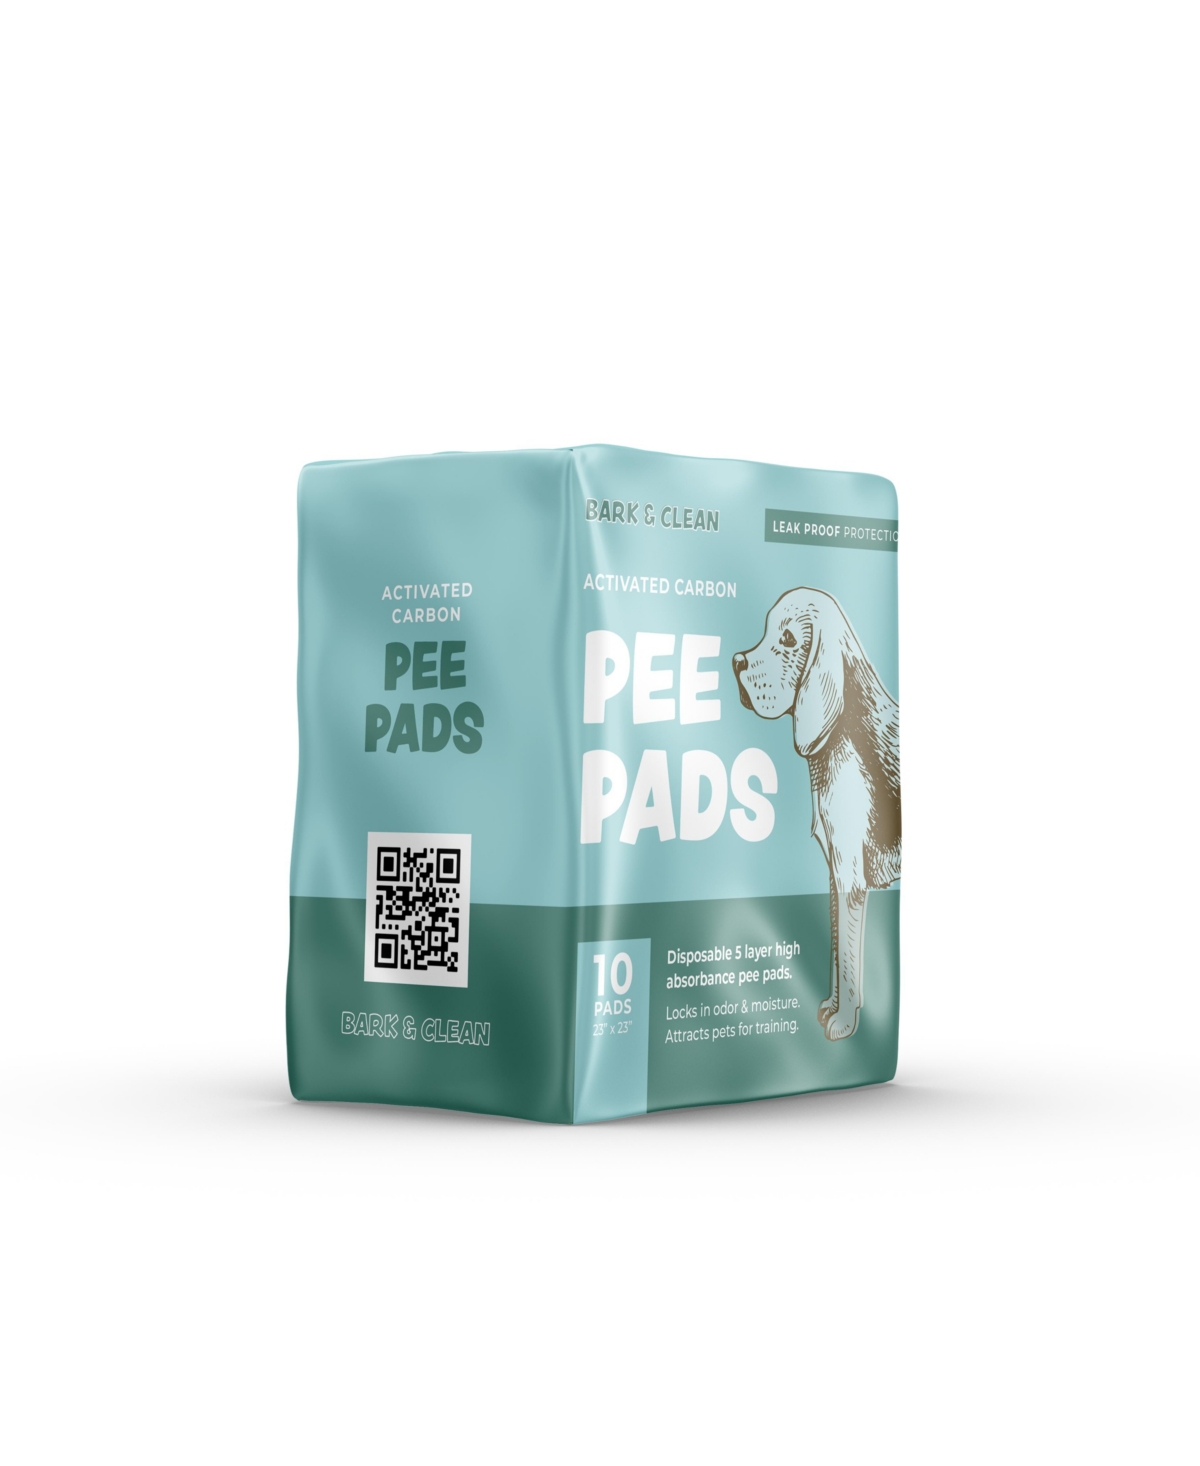 Traveler's Dog and Puppy Pee Pads, Leak-Proof Design, Heavy Duty Absorbency, 23" x 23", 10 Count - Charcoal